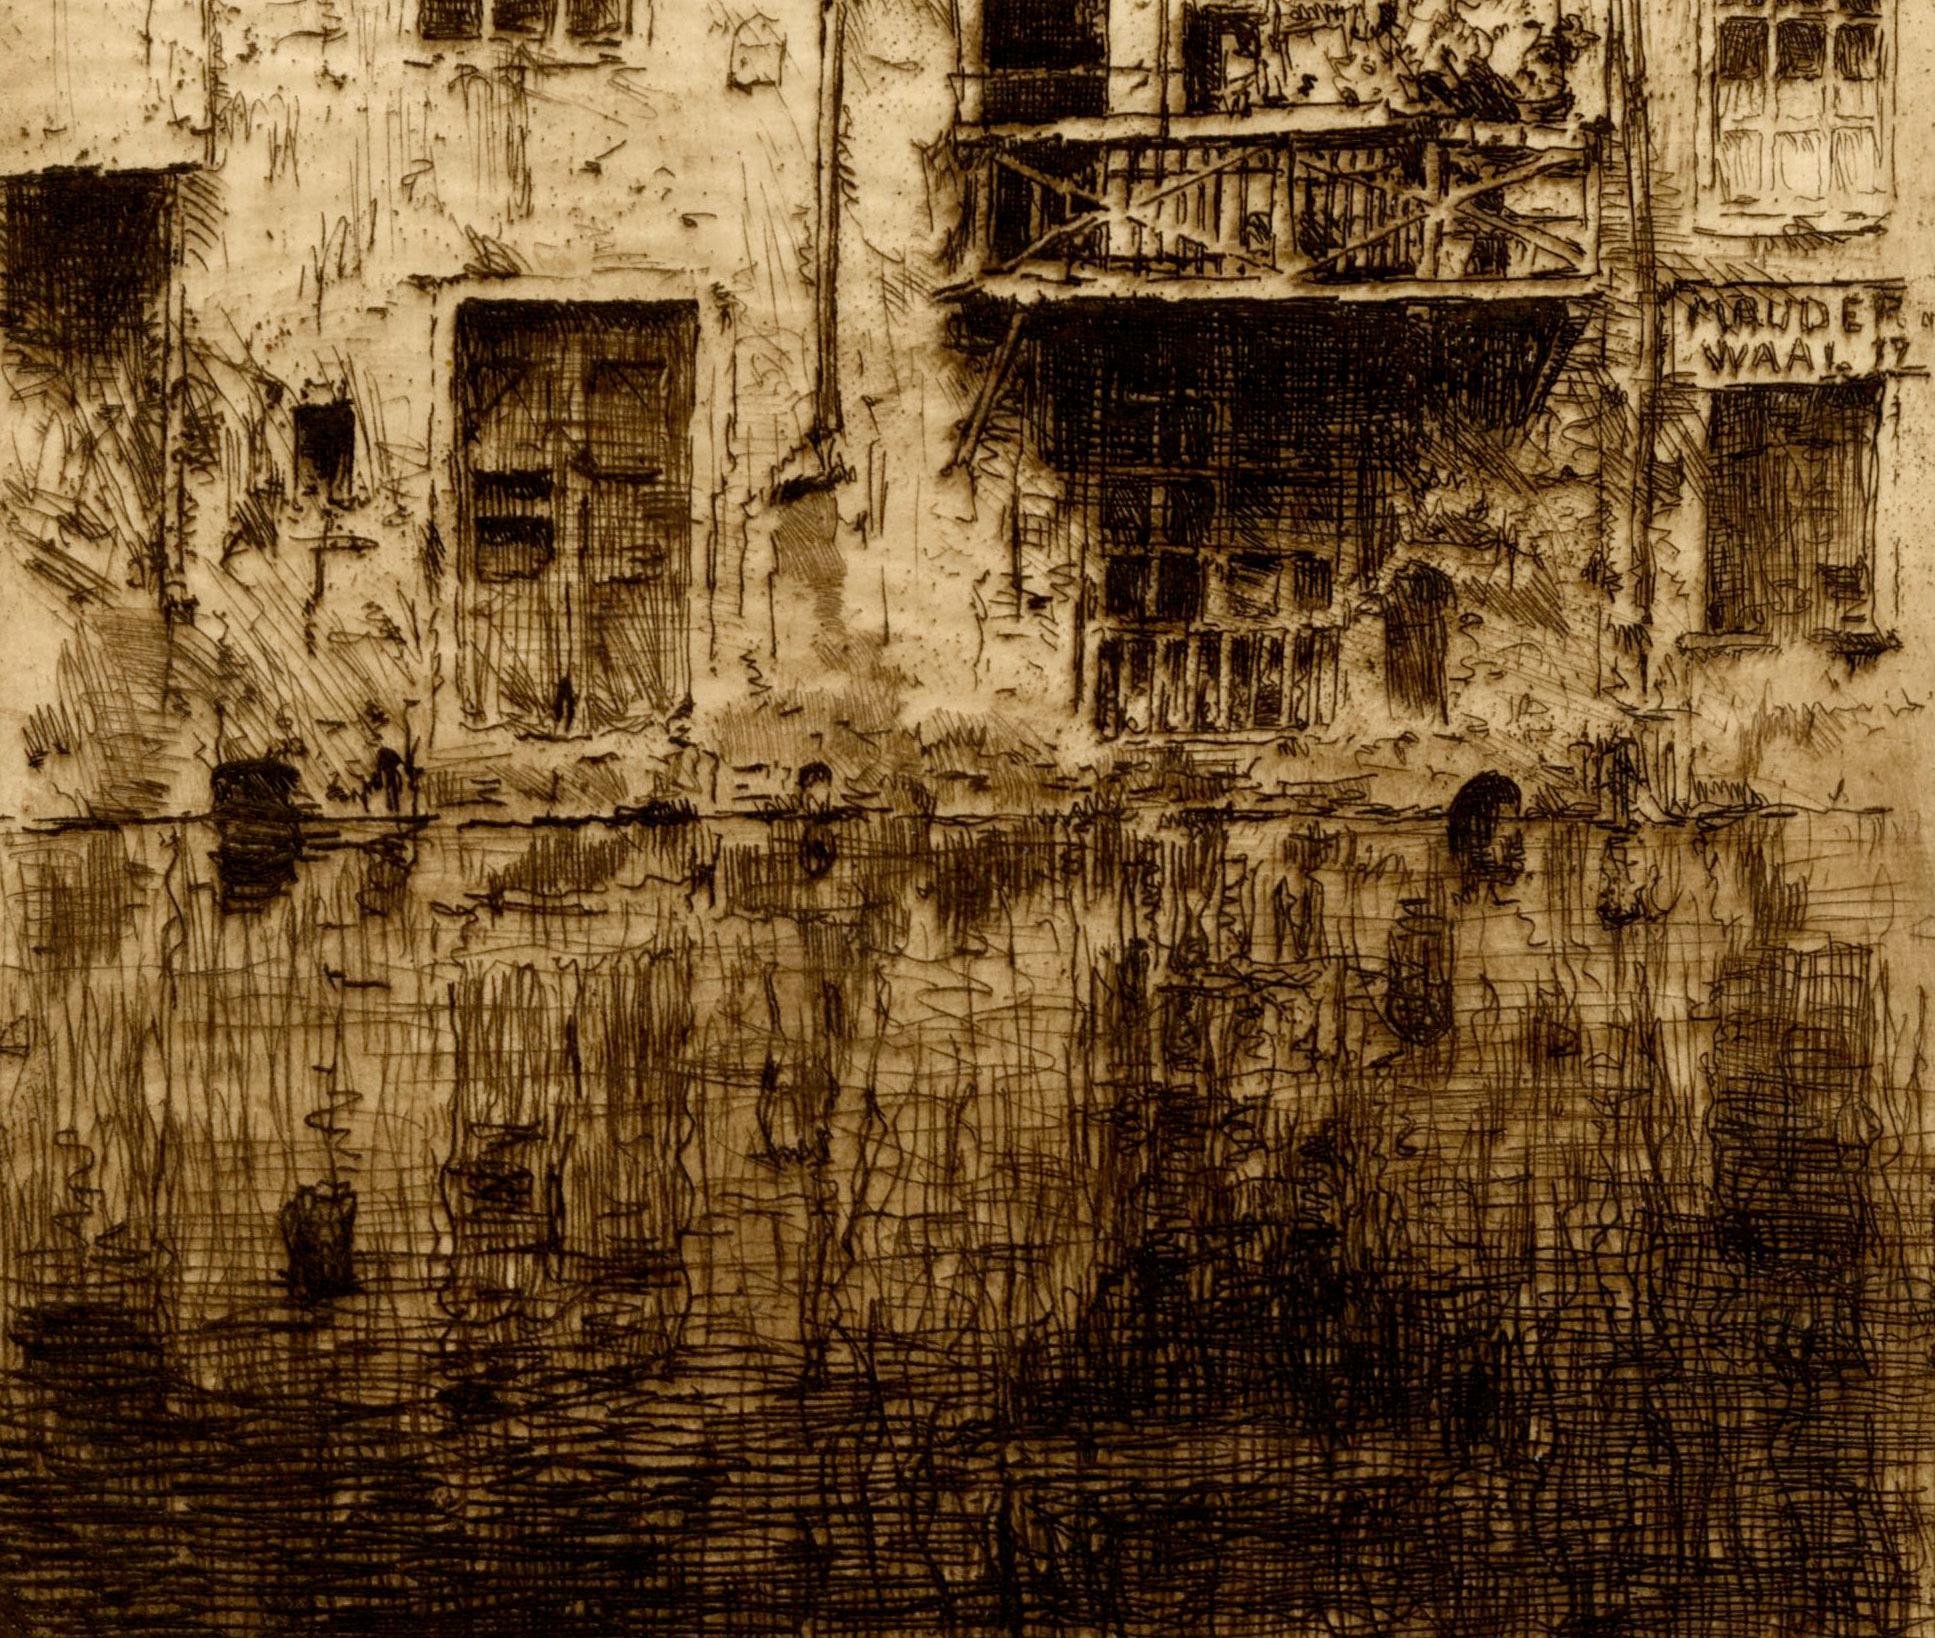 Old Houses in Amsterdam
Drypoint, 1909
Signed and dedicated in pencil lower right.
